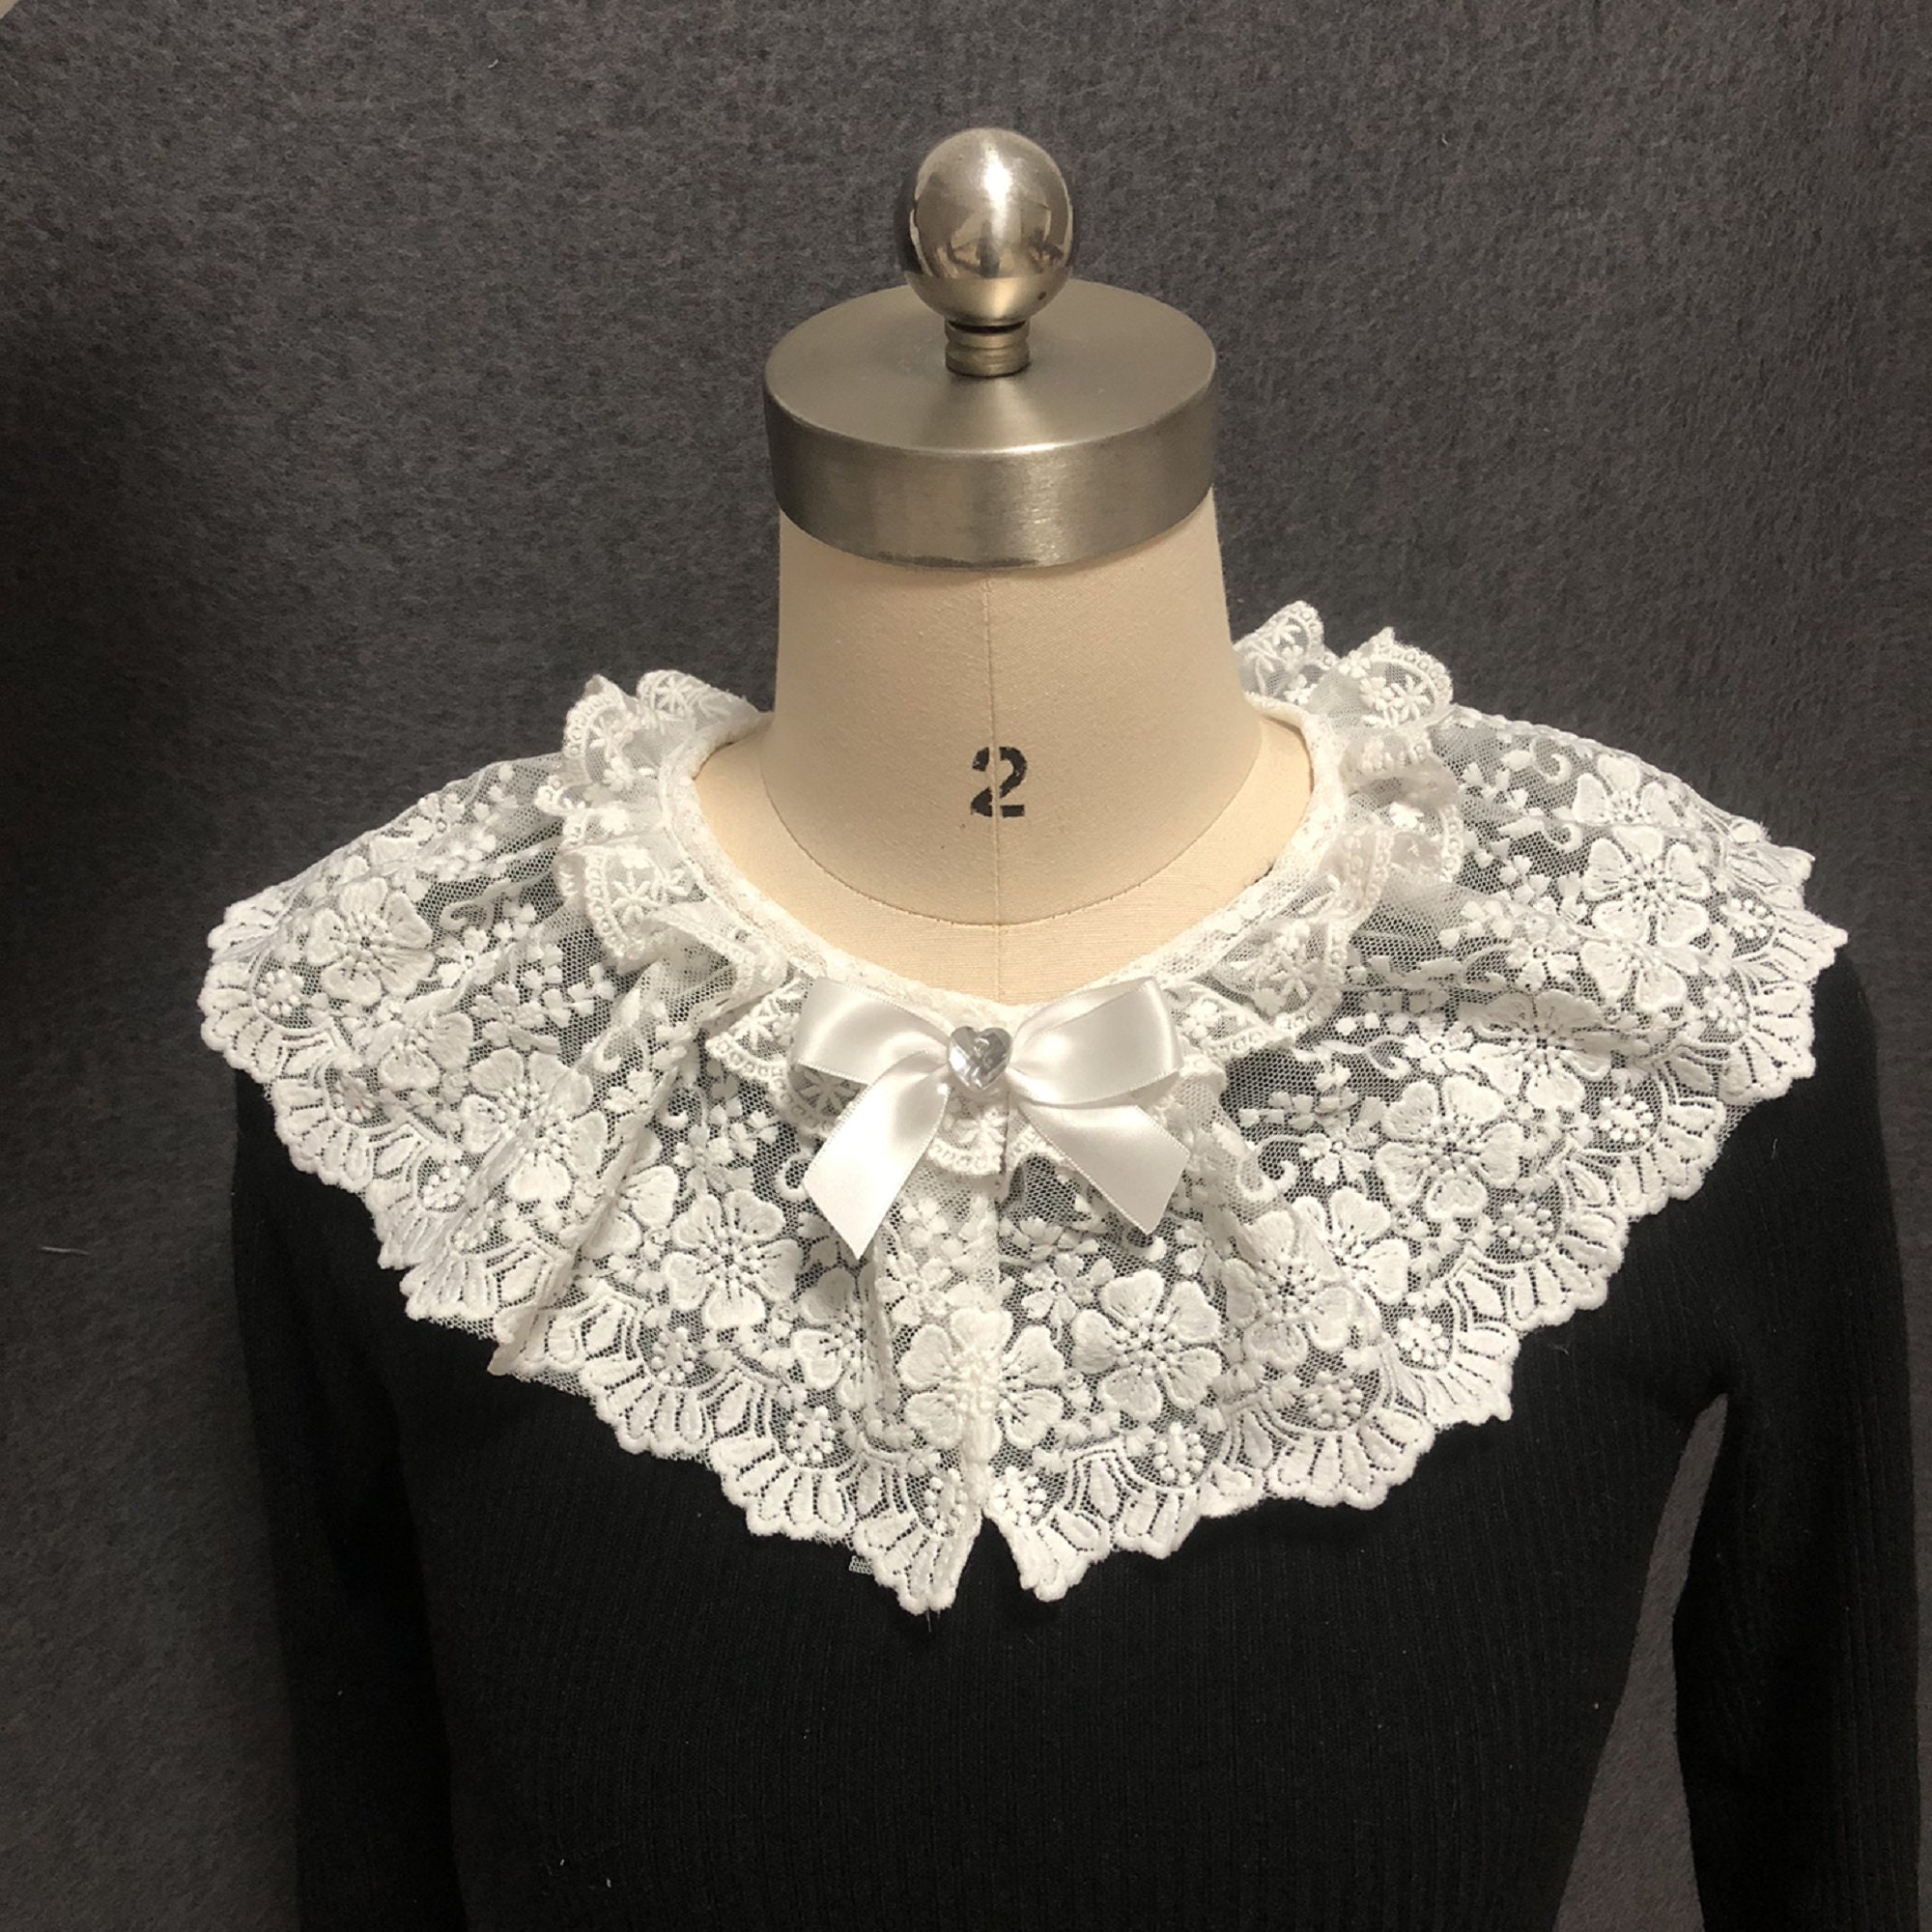 How to make a detachable lace collar - The Last Stitch